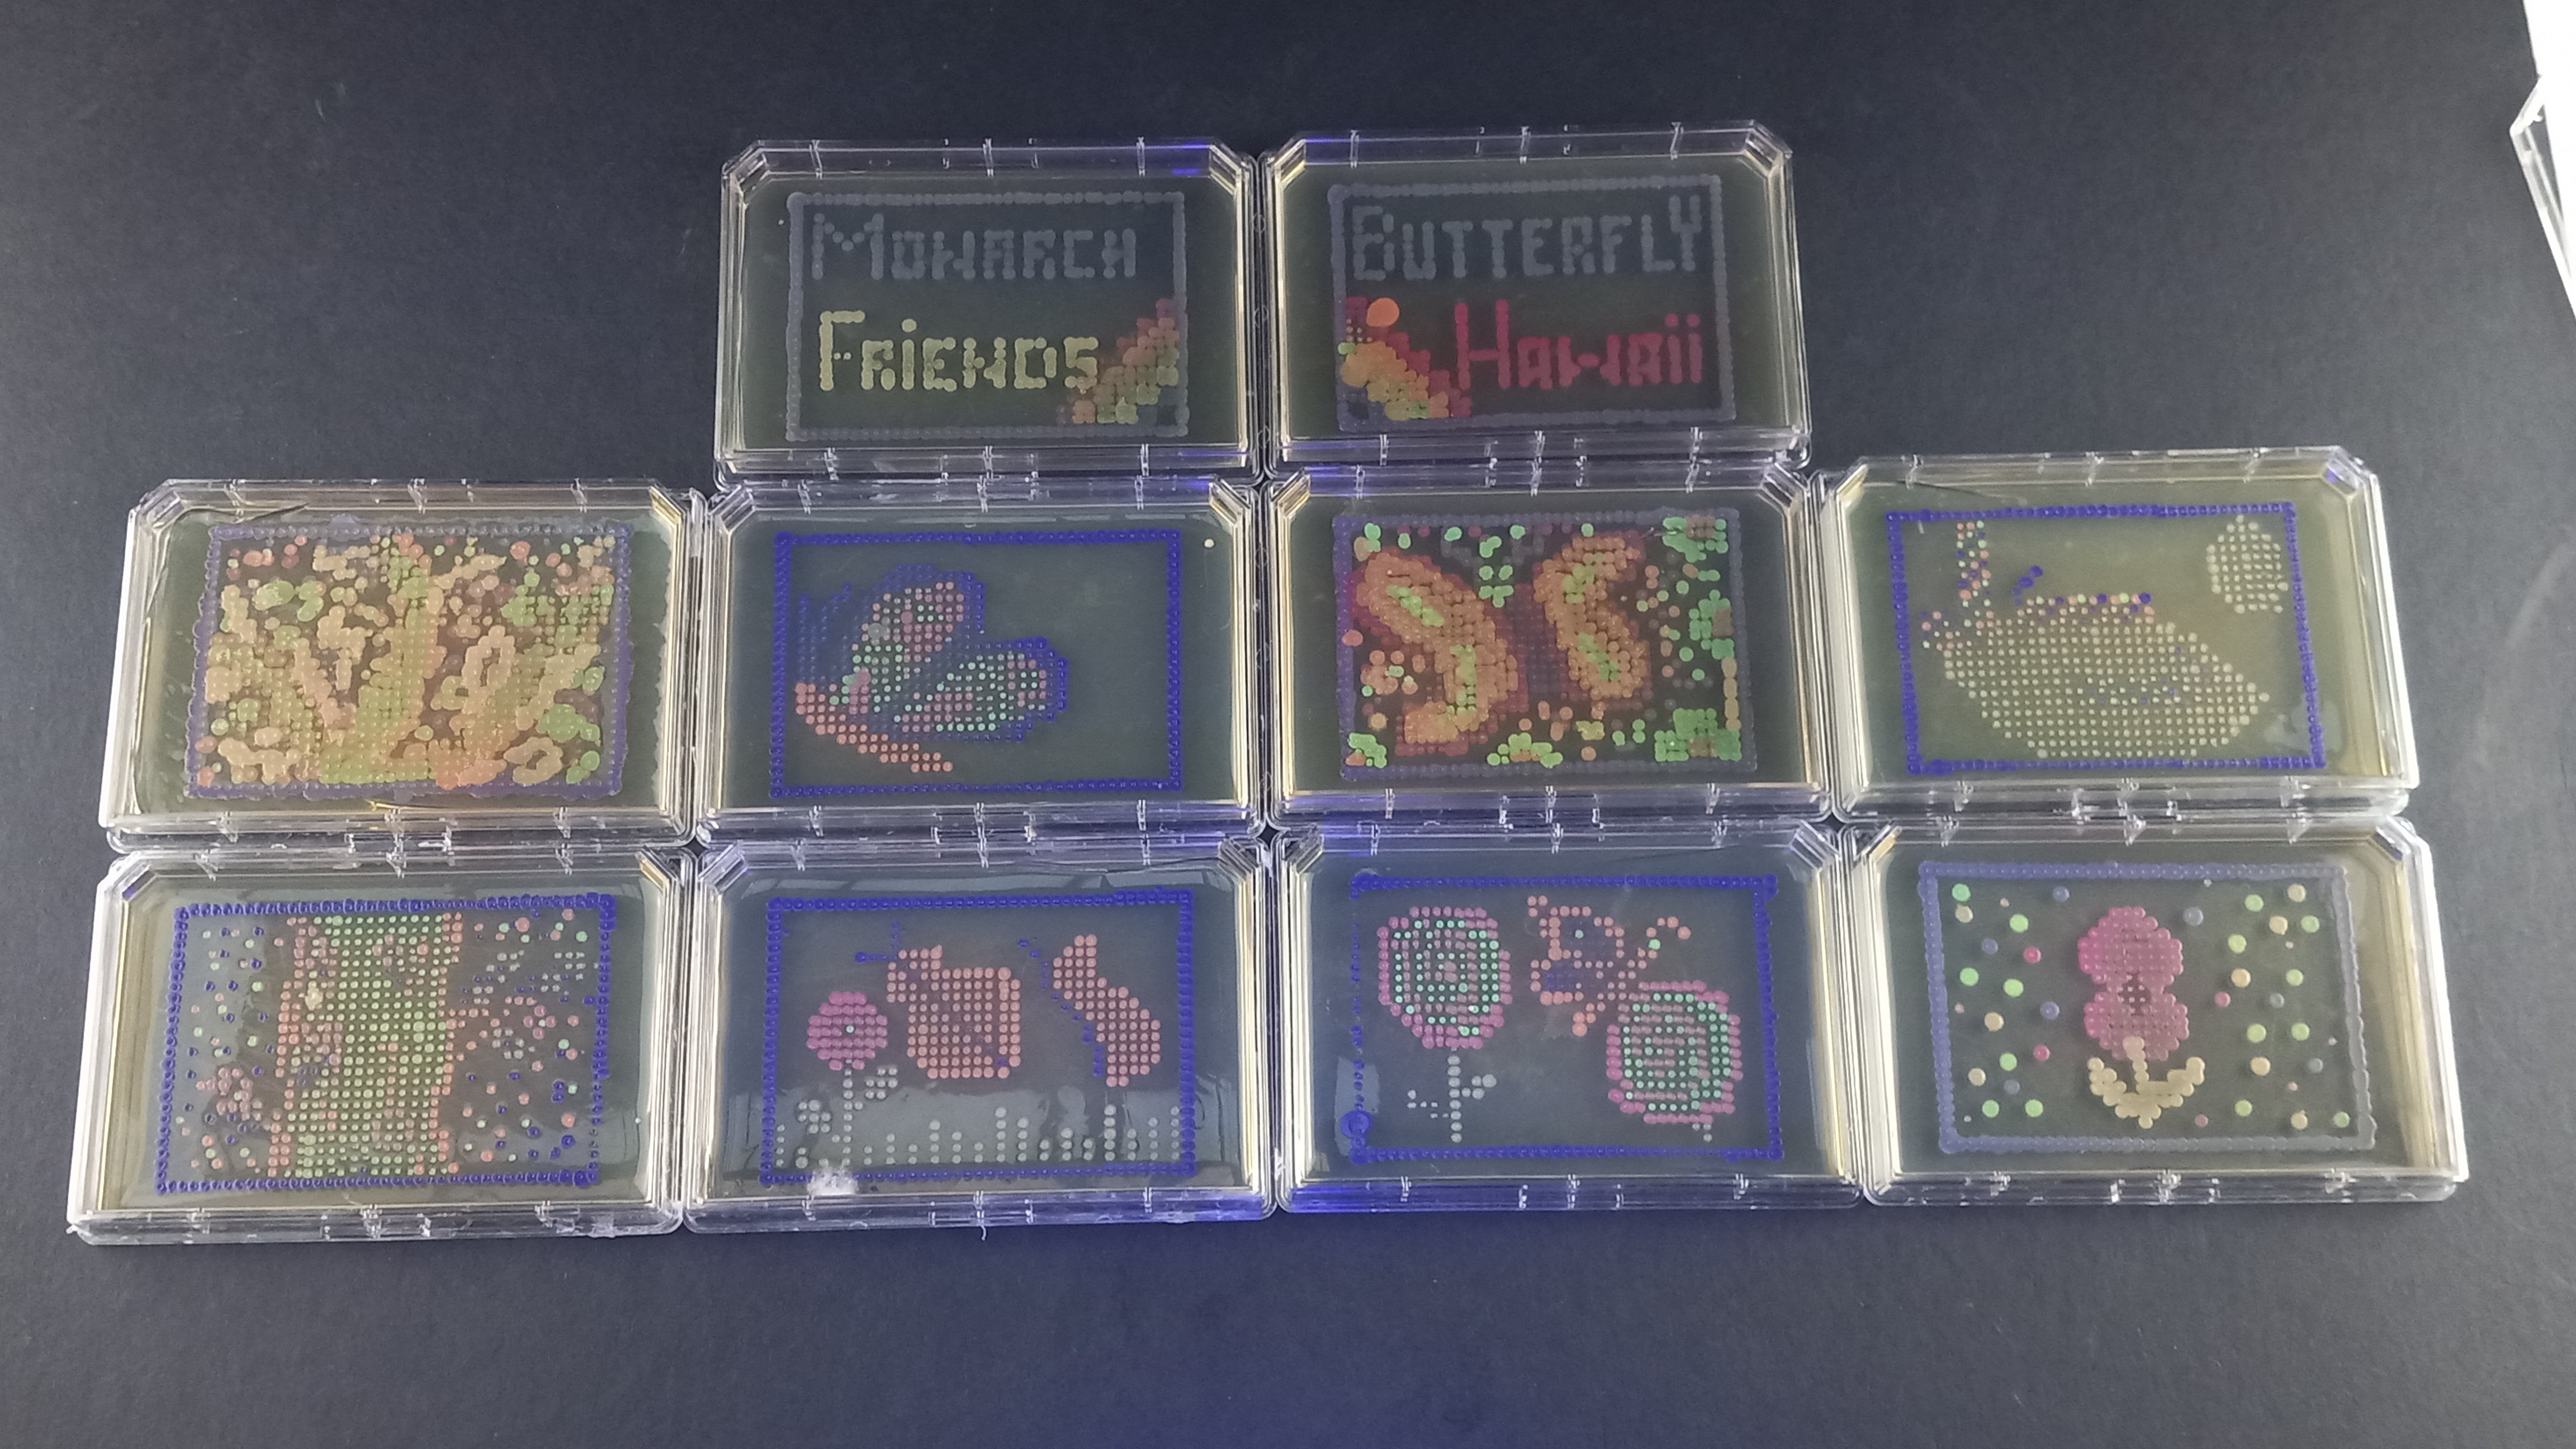 Monarchs Are Our Friends (pt1) - 2nd place in the 2021 ASM Agar Art Contest (non-professional category)